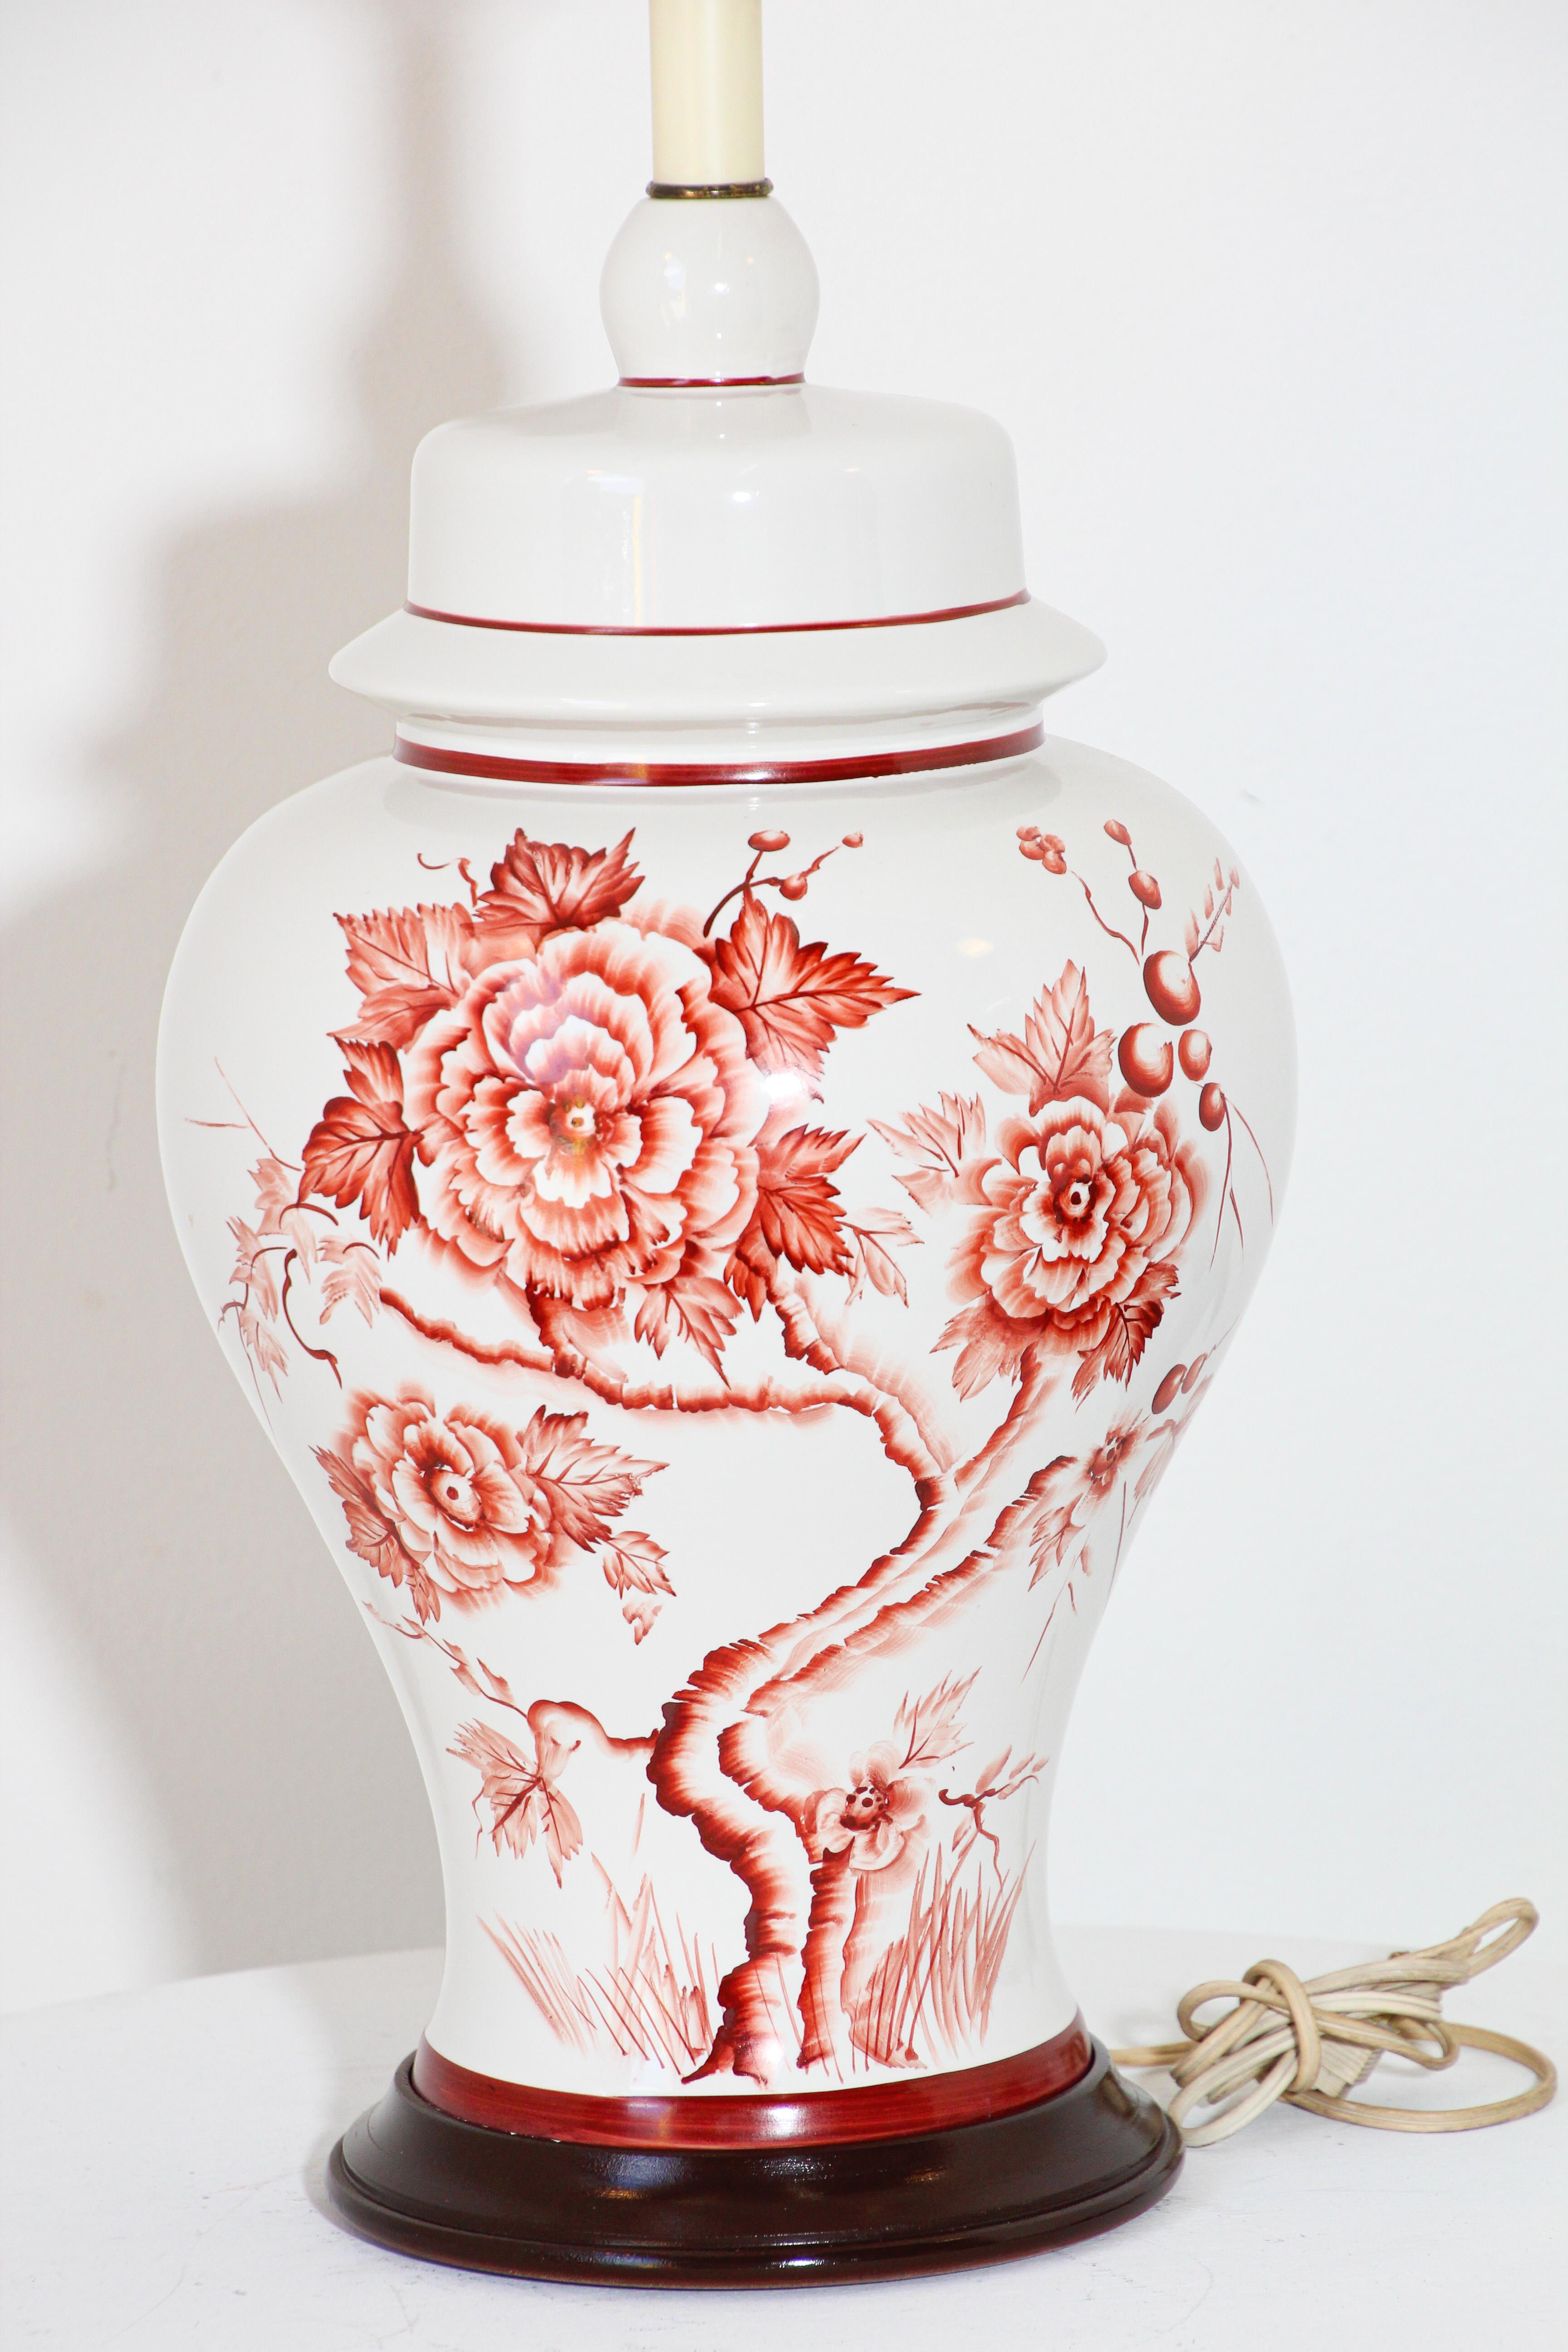 Hand-Crafted Vintage Chinese White Porcelain Jar Table Lamp For Sale